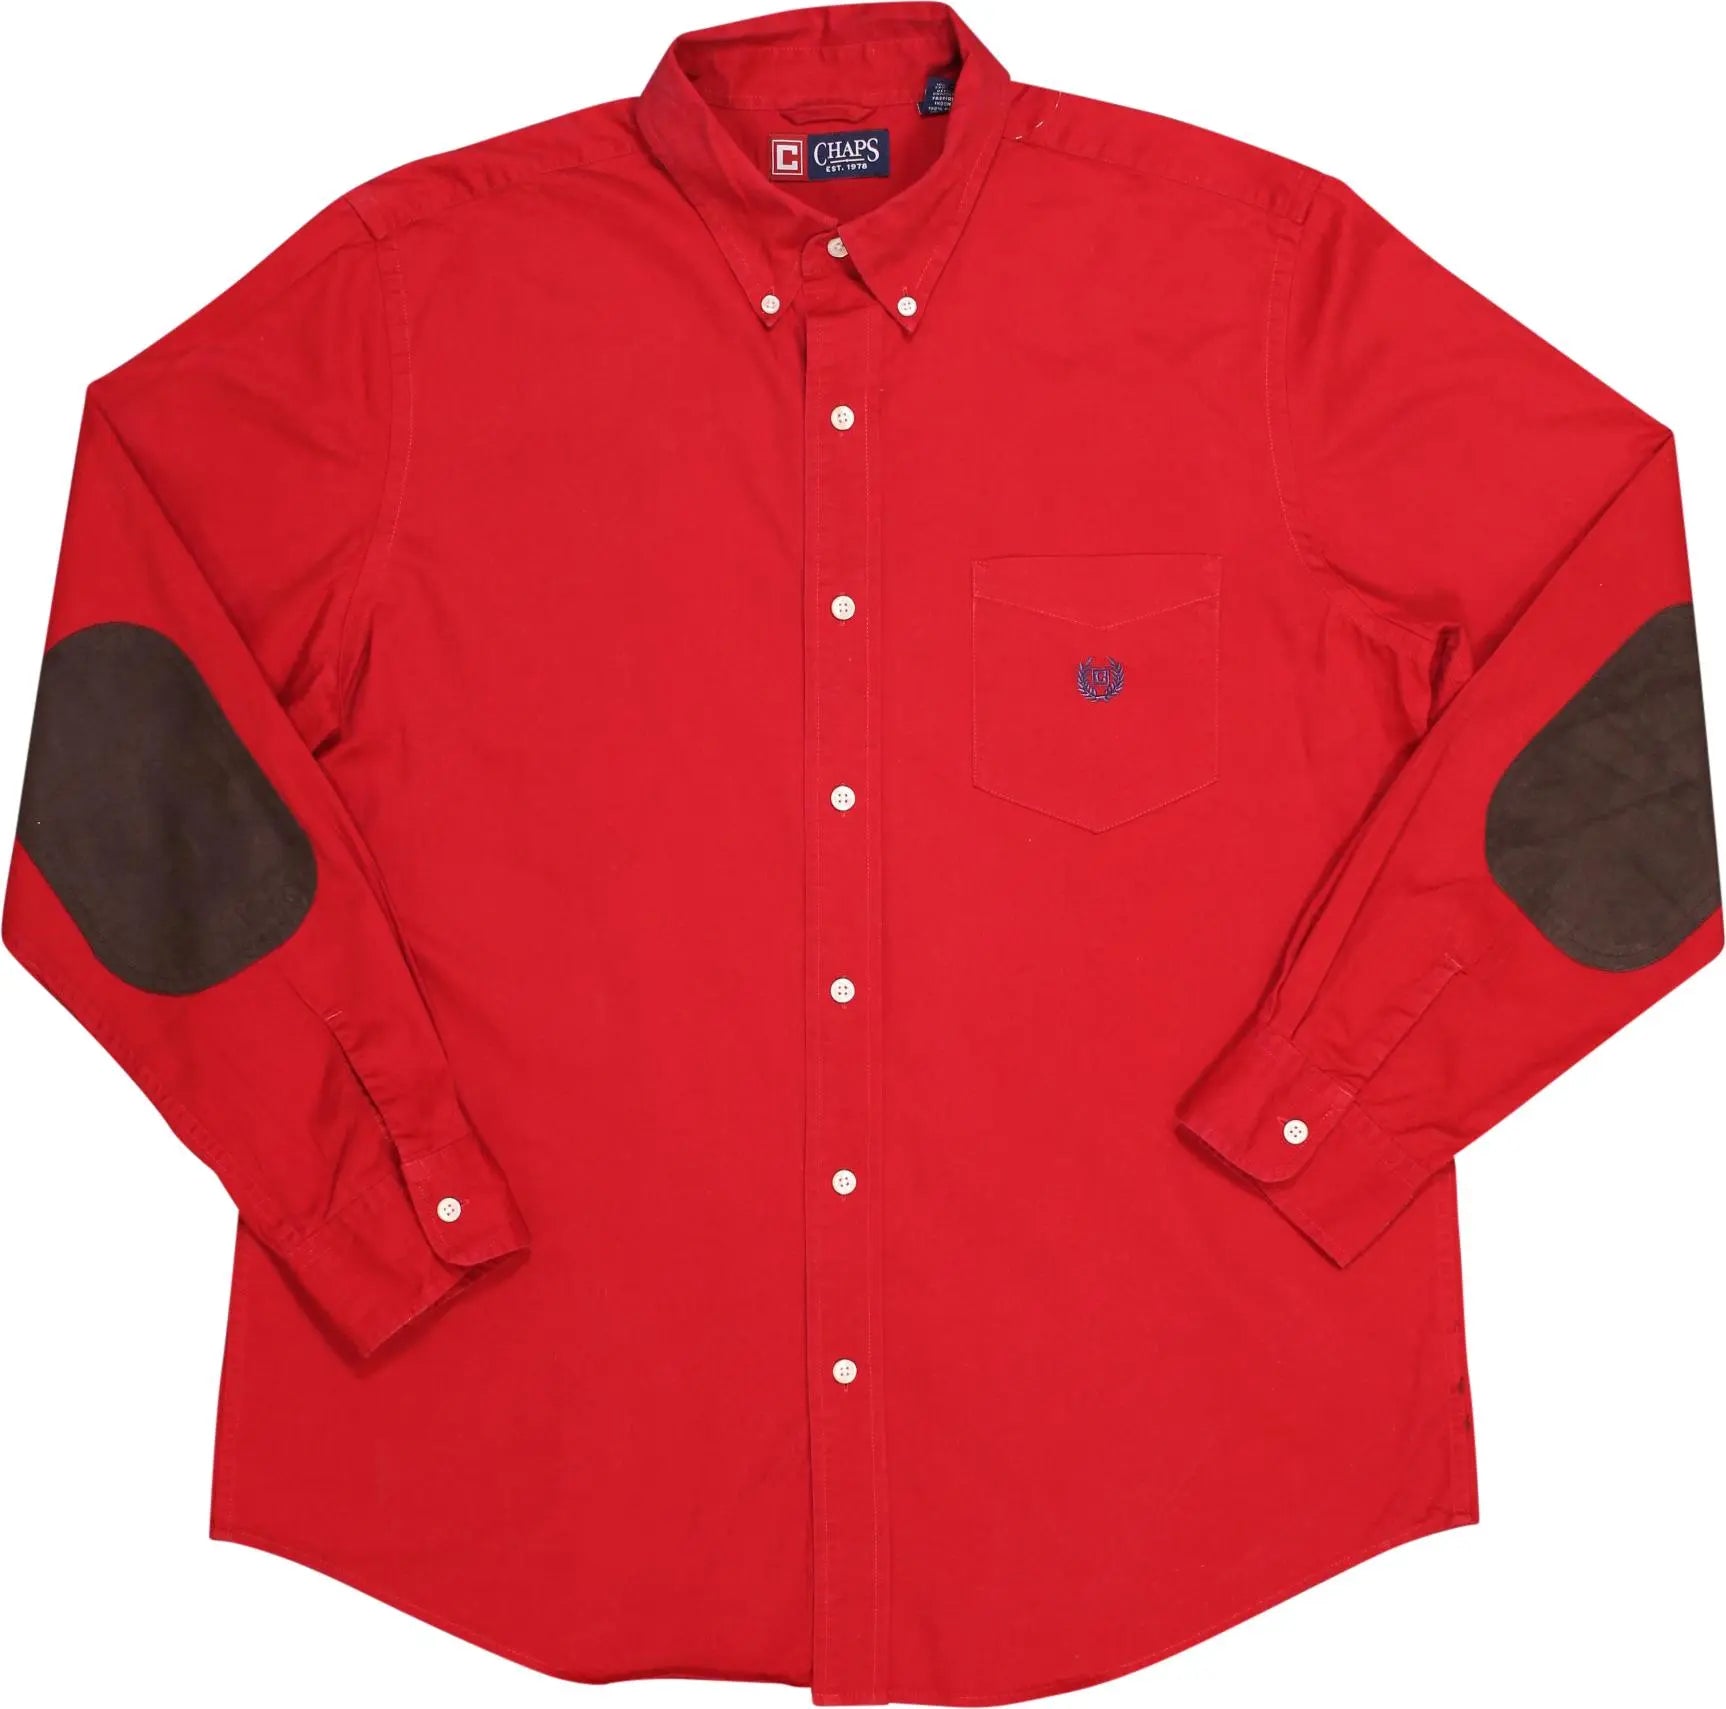 Chaps Ralph Lauren - Red Shirt by Chaps Ralph Lauren- ThriftTale.com - Vintage and second handclothing